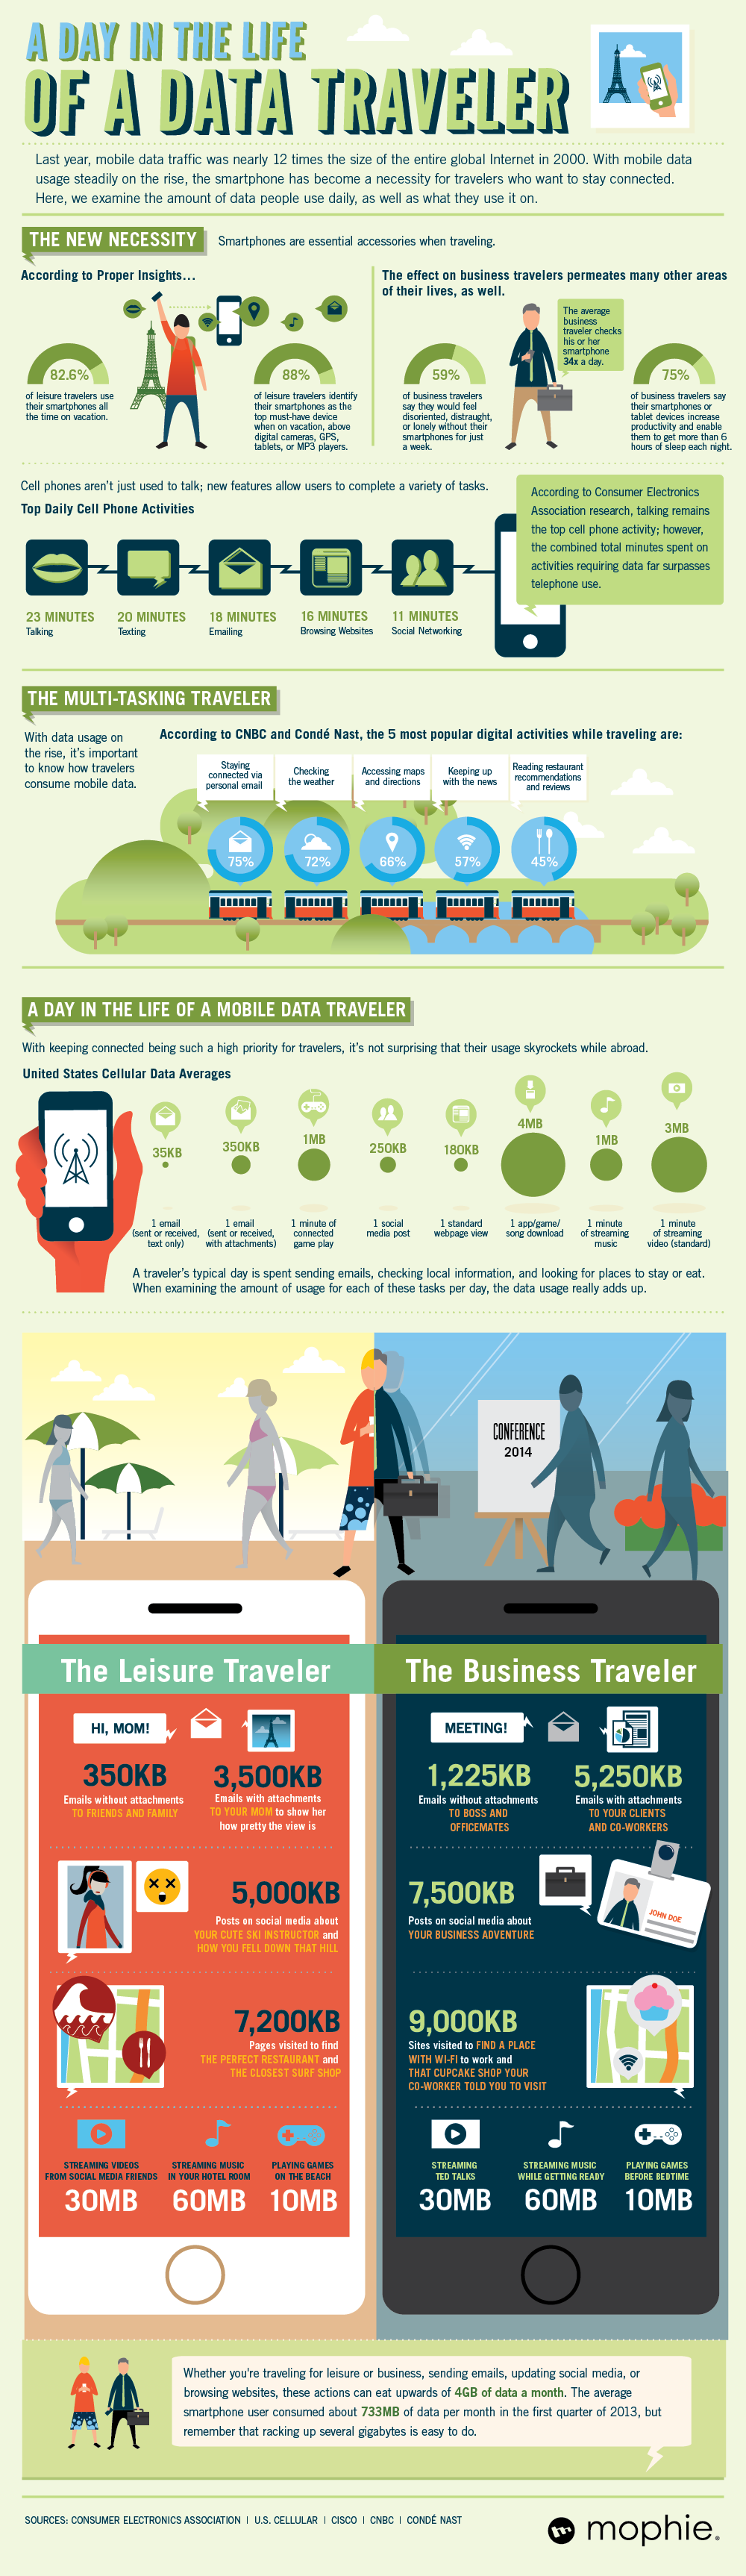 A Day in the Life of a Data Traveler [Infographic]